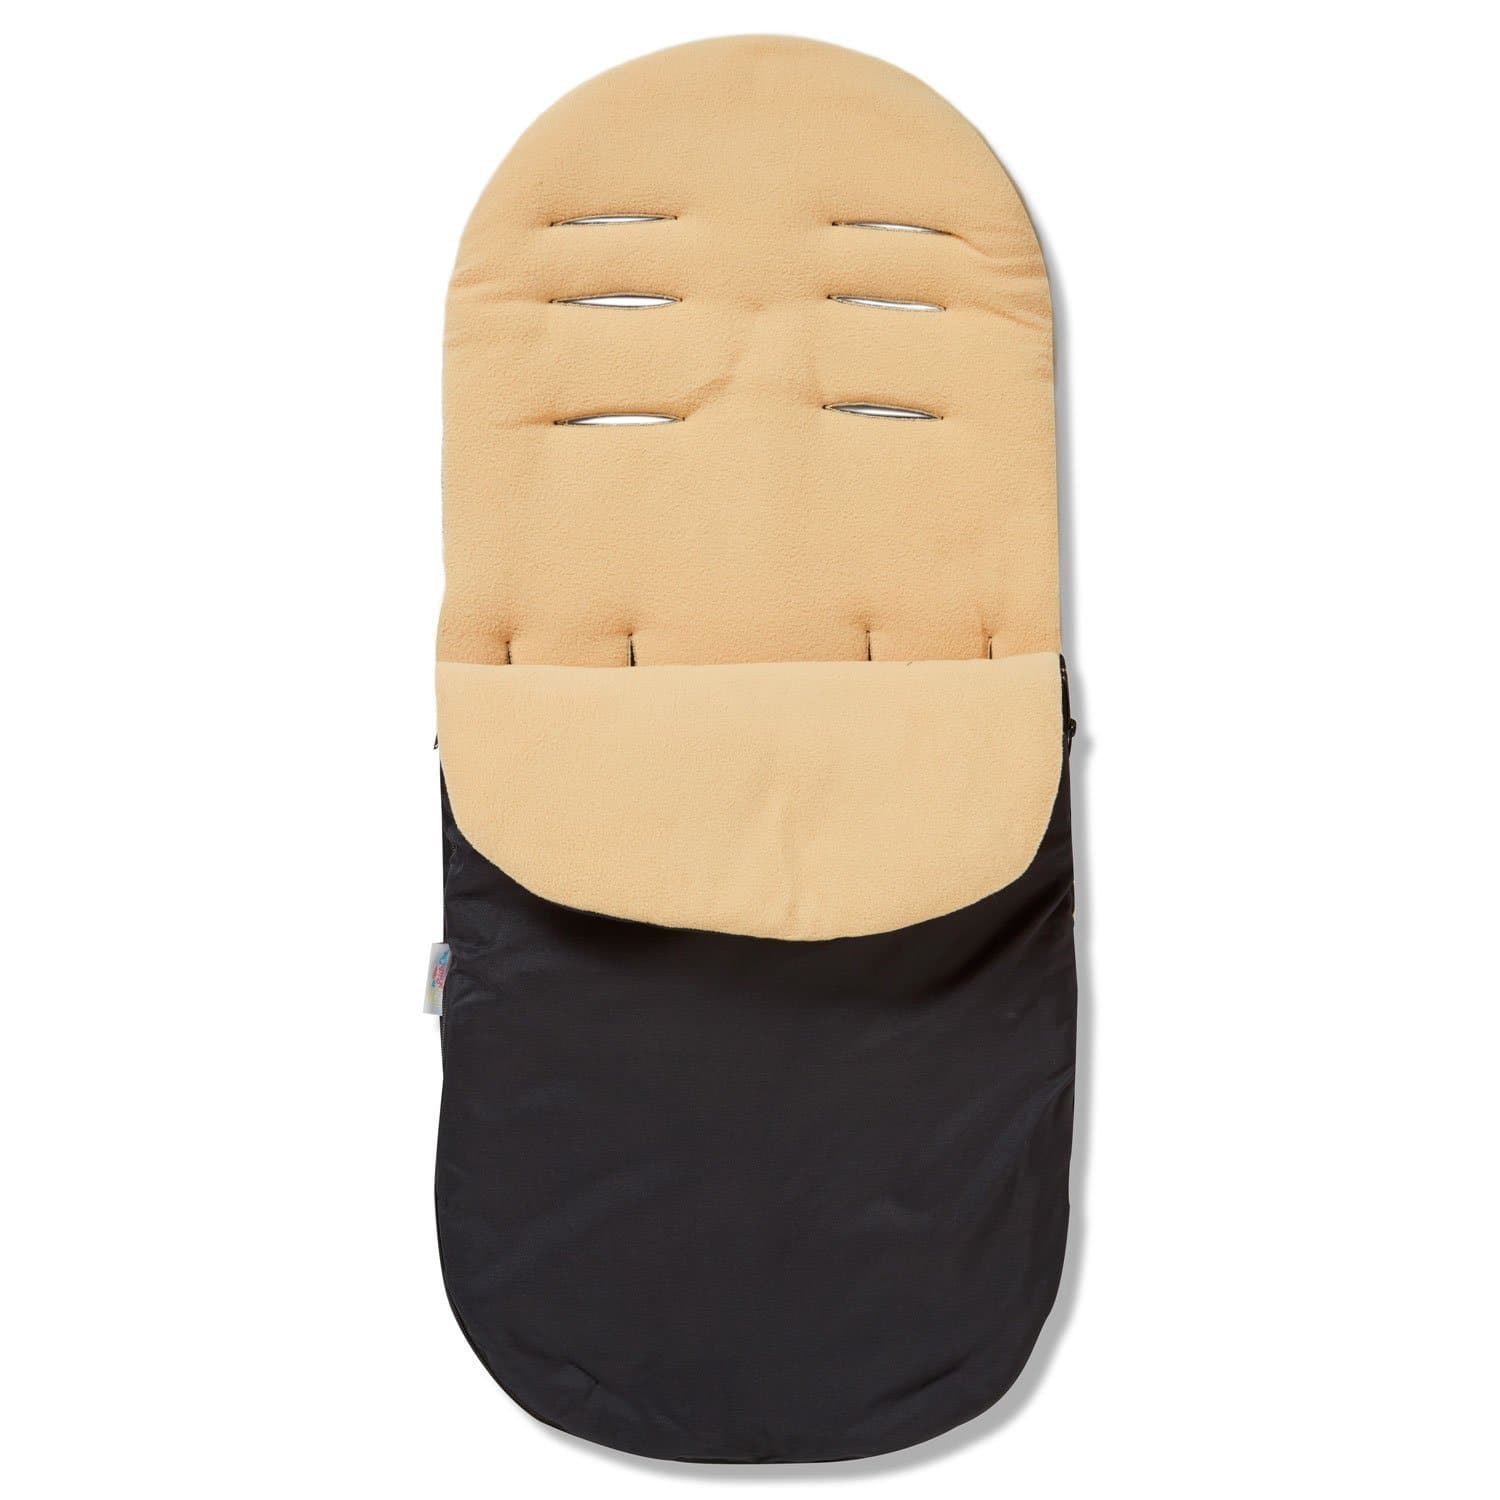 Footmuff / Cosy Toes Compatible with Egg - For Your Little One